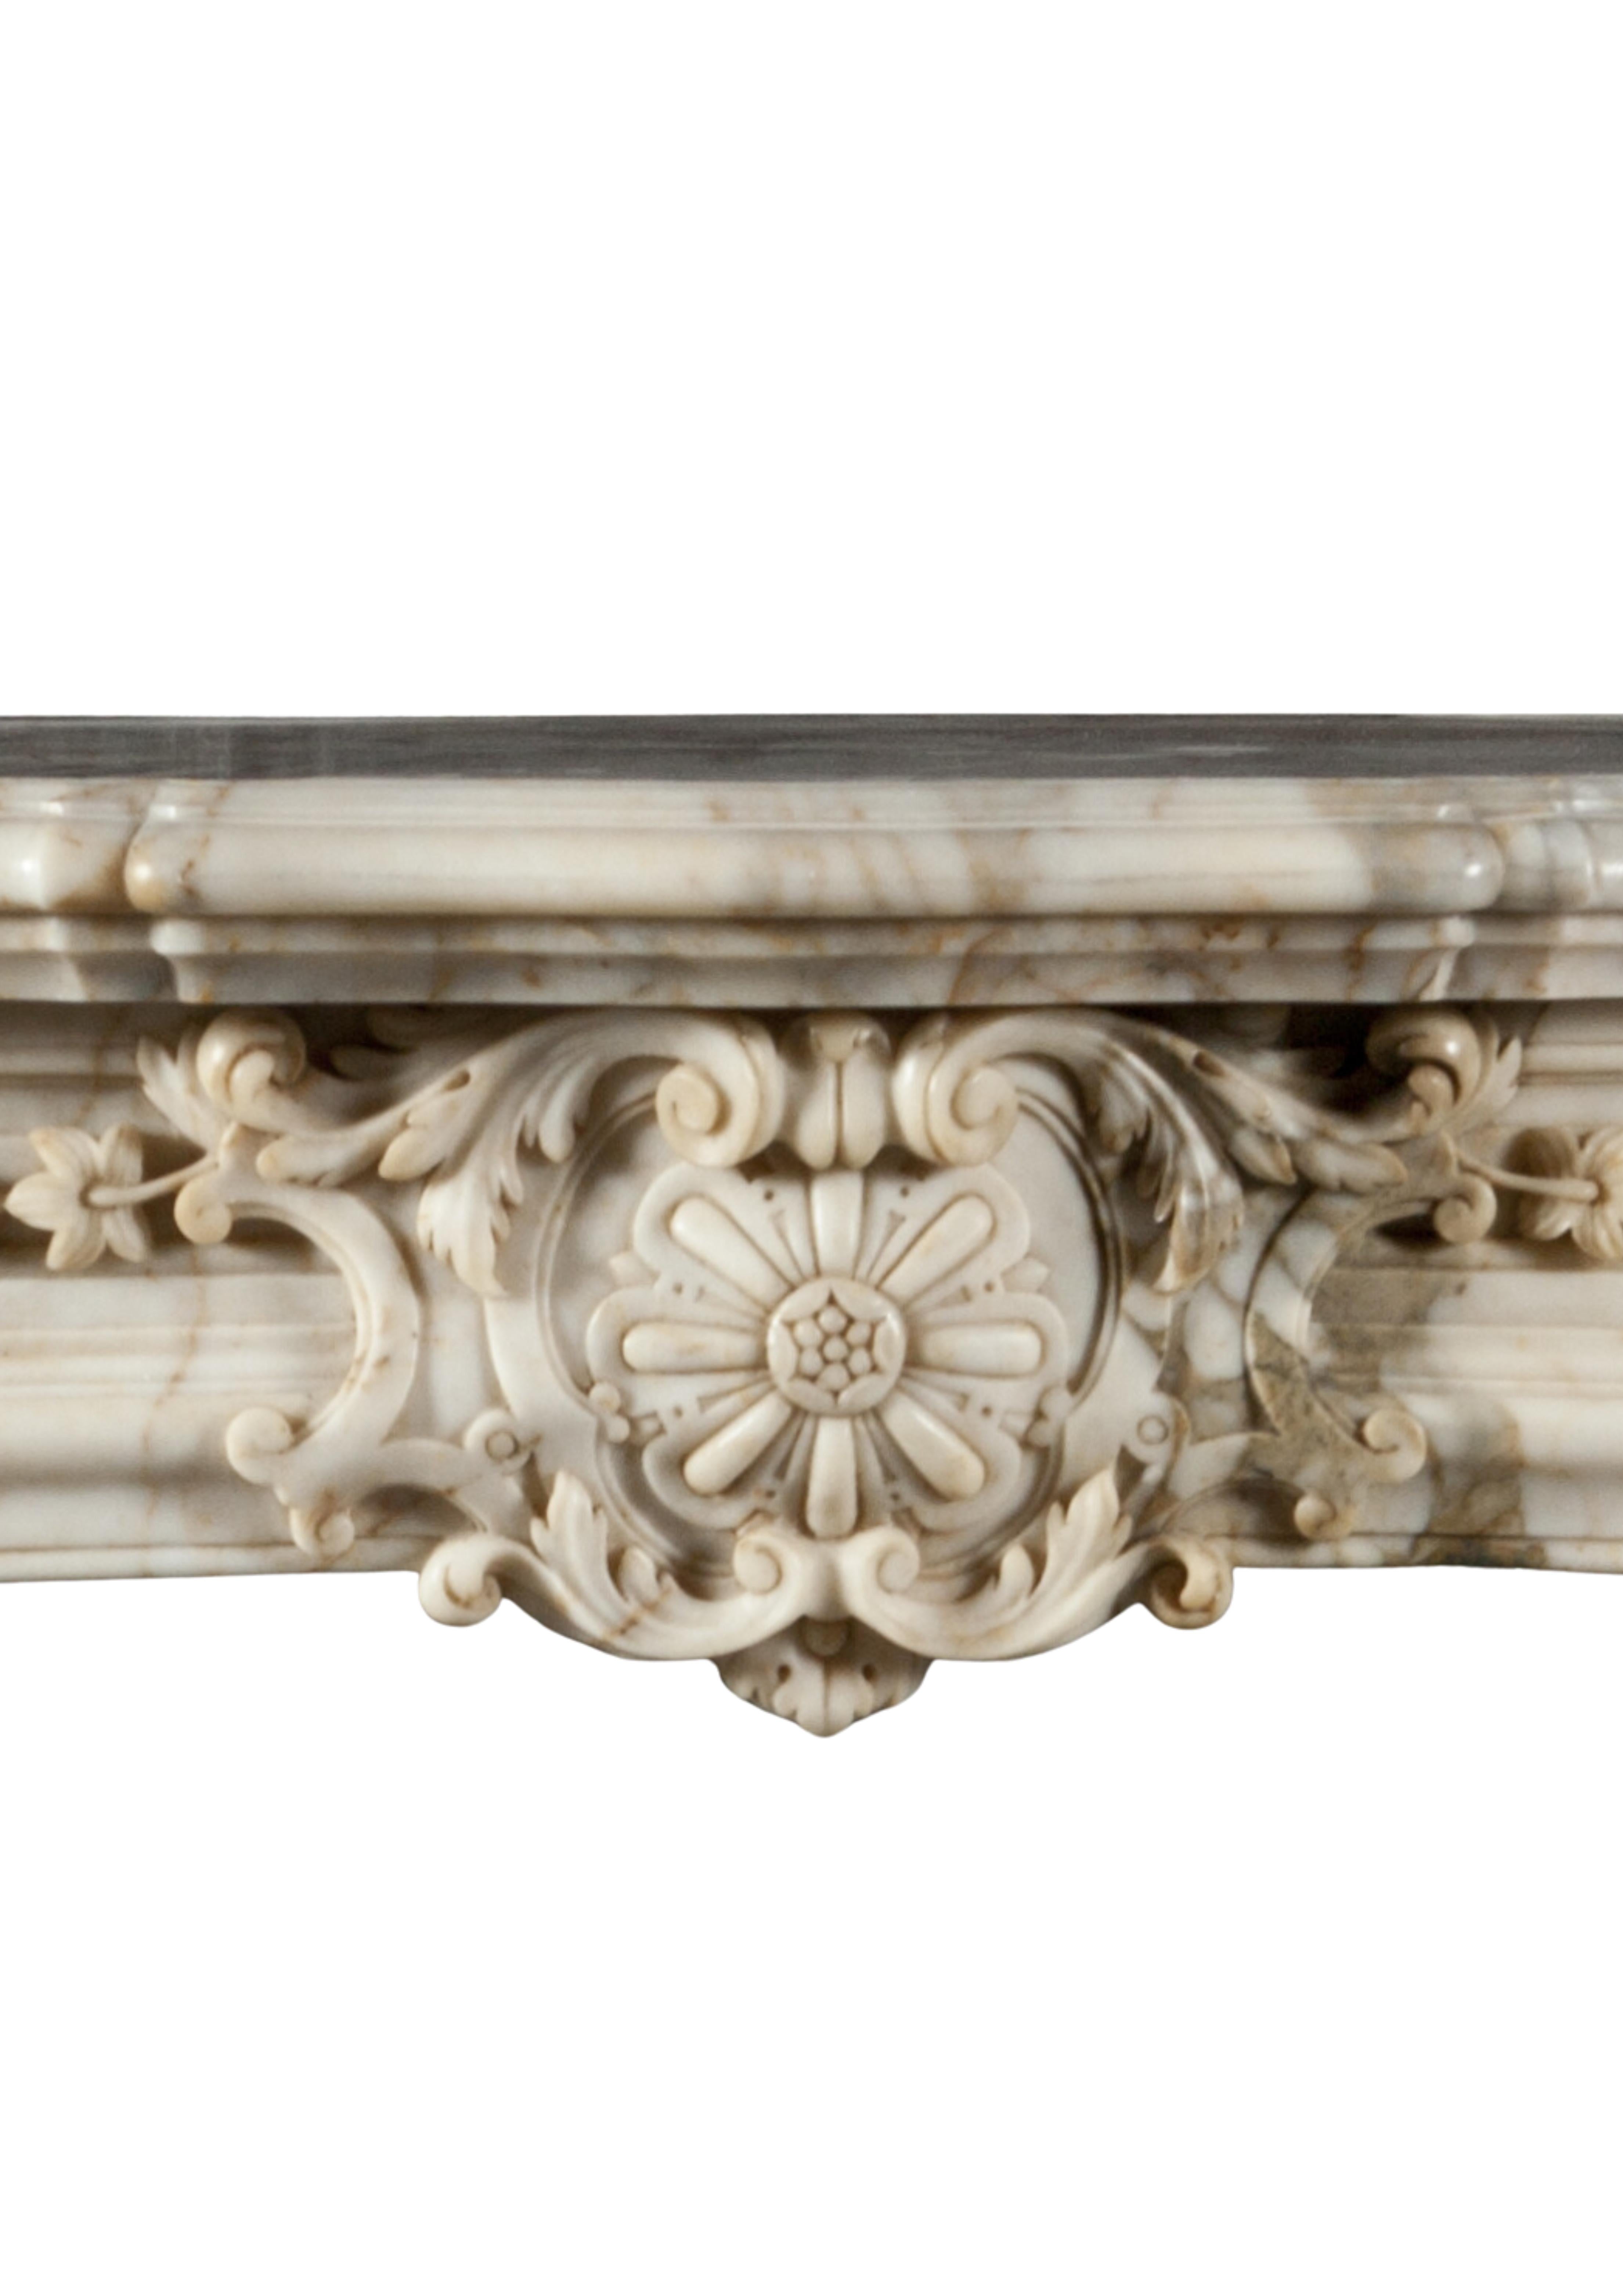 Small and beautiful reproduction of a regency fireplace made in old Italian arabescato marble. The serpentine paneled frieze is centered by classical french regency cartouche and flanked by nicely carved end blocks .